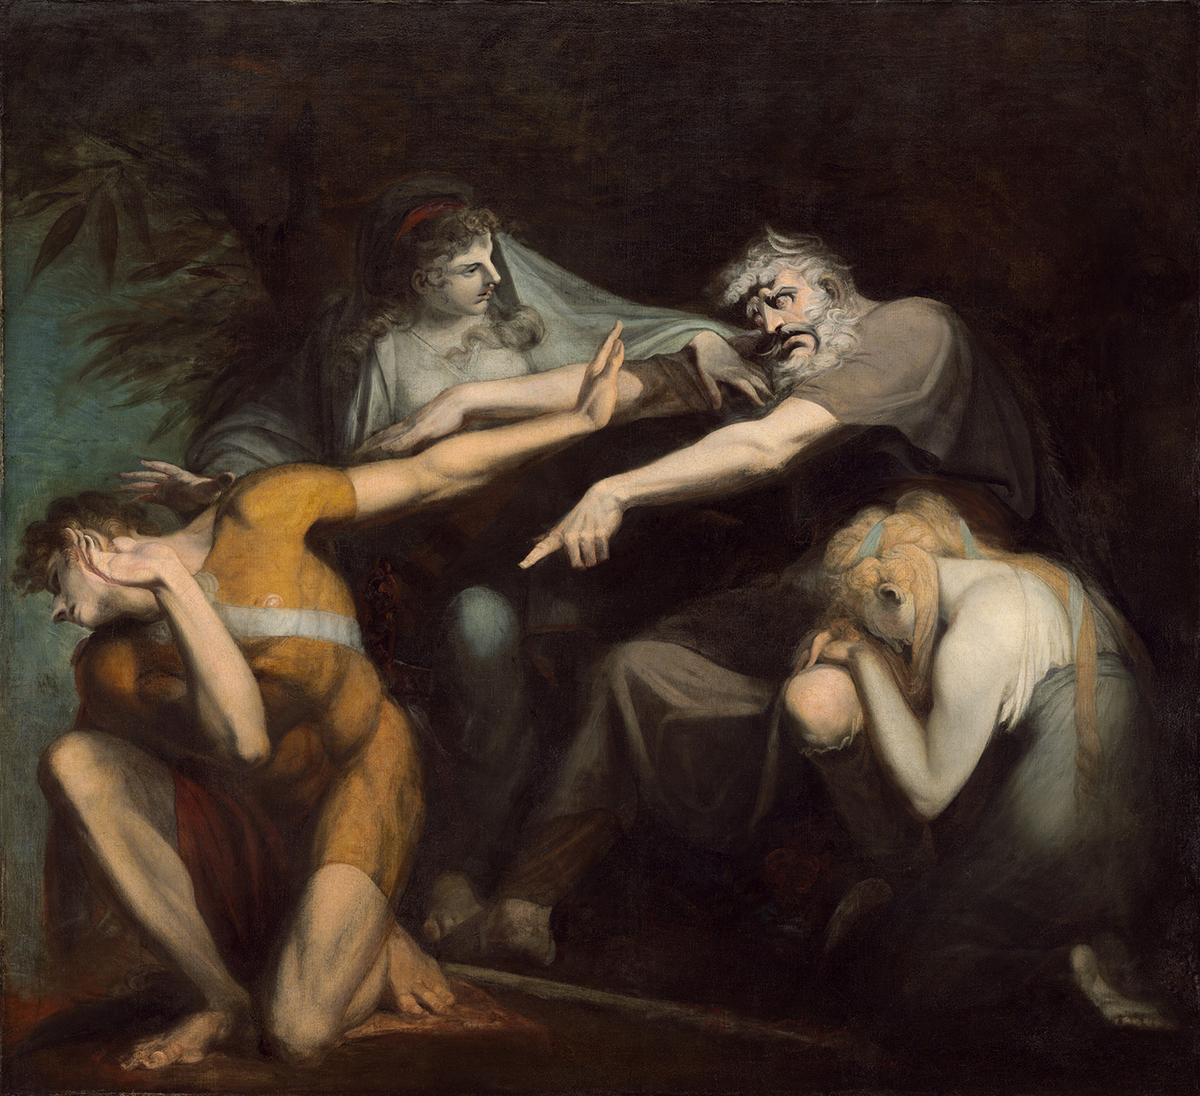 “Oedipus Cursing His Son Polynices,” 1786, by Henri Fuseli. Oil on canvas. National Gallery of Art, Washington. (Public Domain)